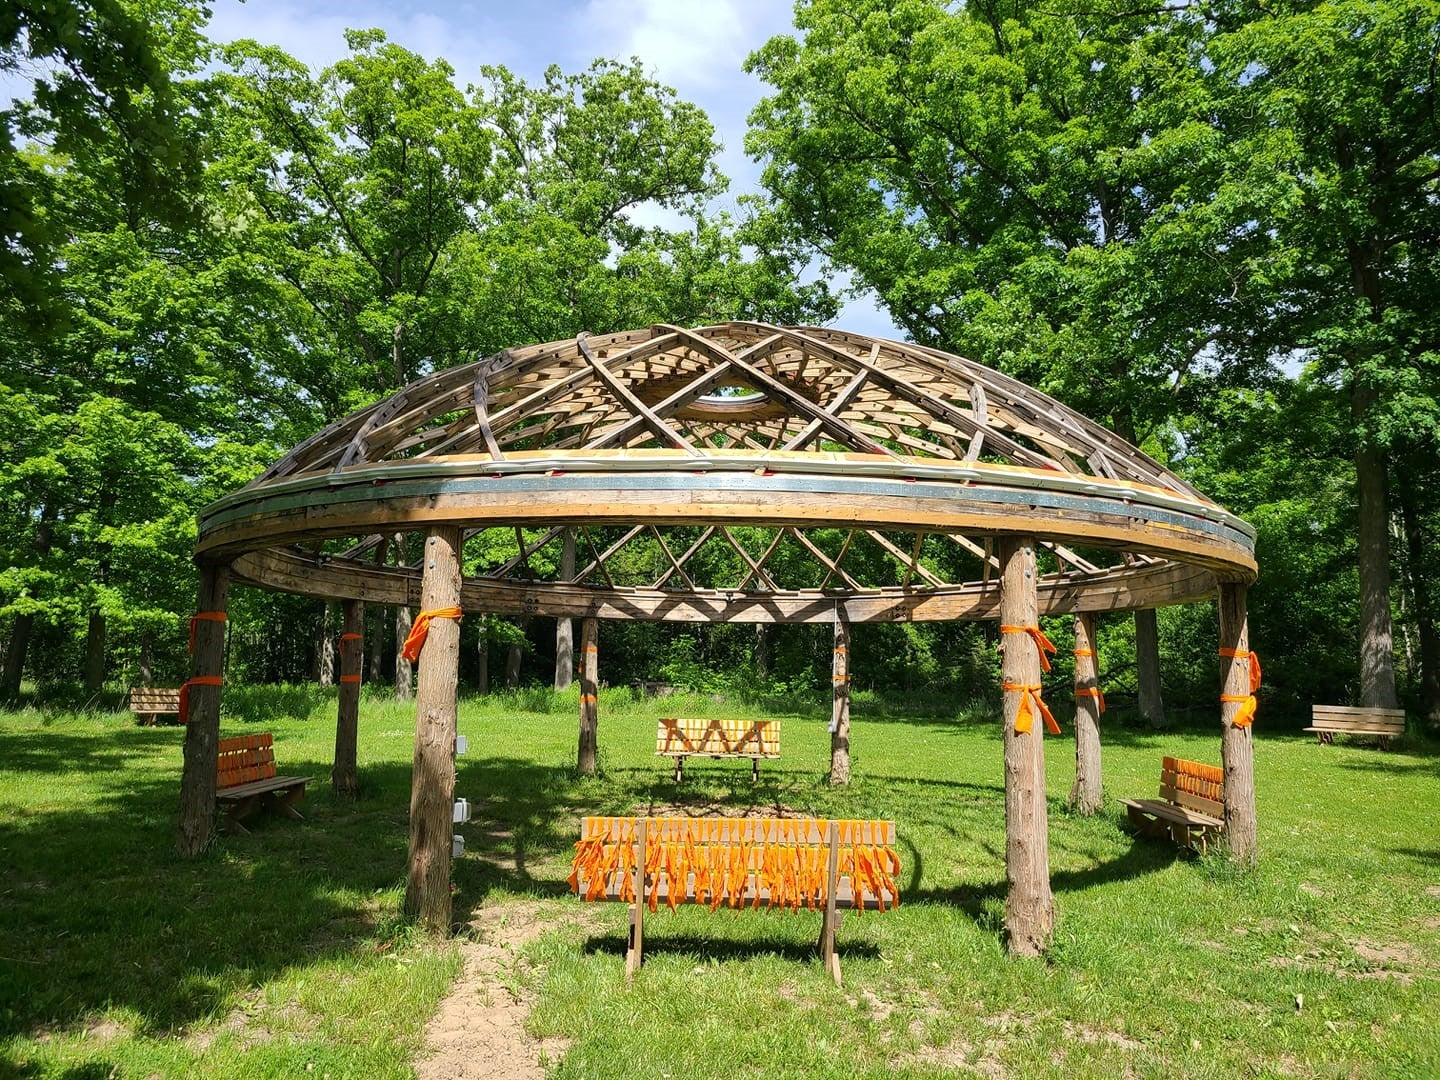 A wooden gathering space. The circular structure has four benches and orange decorative ties. 